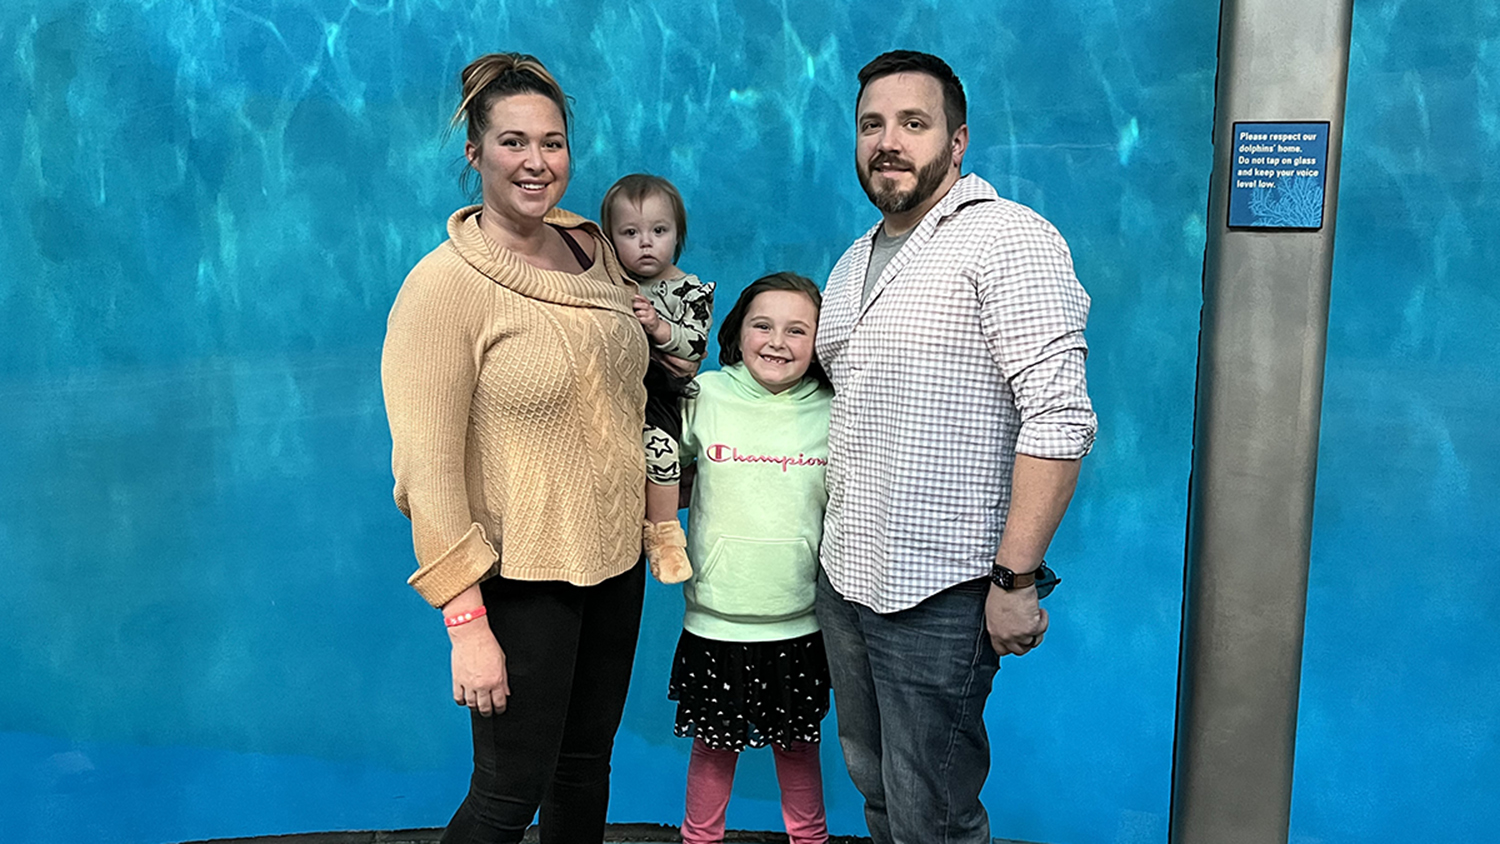 Kye Nielsen, right, poses with his family in front of a large aquarium designed for oceanic life.